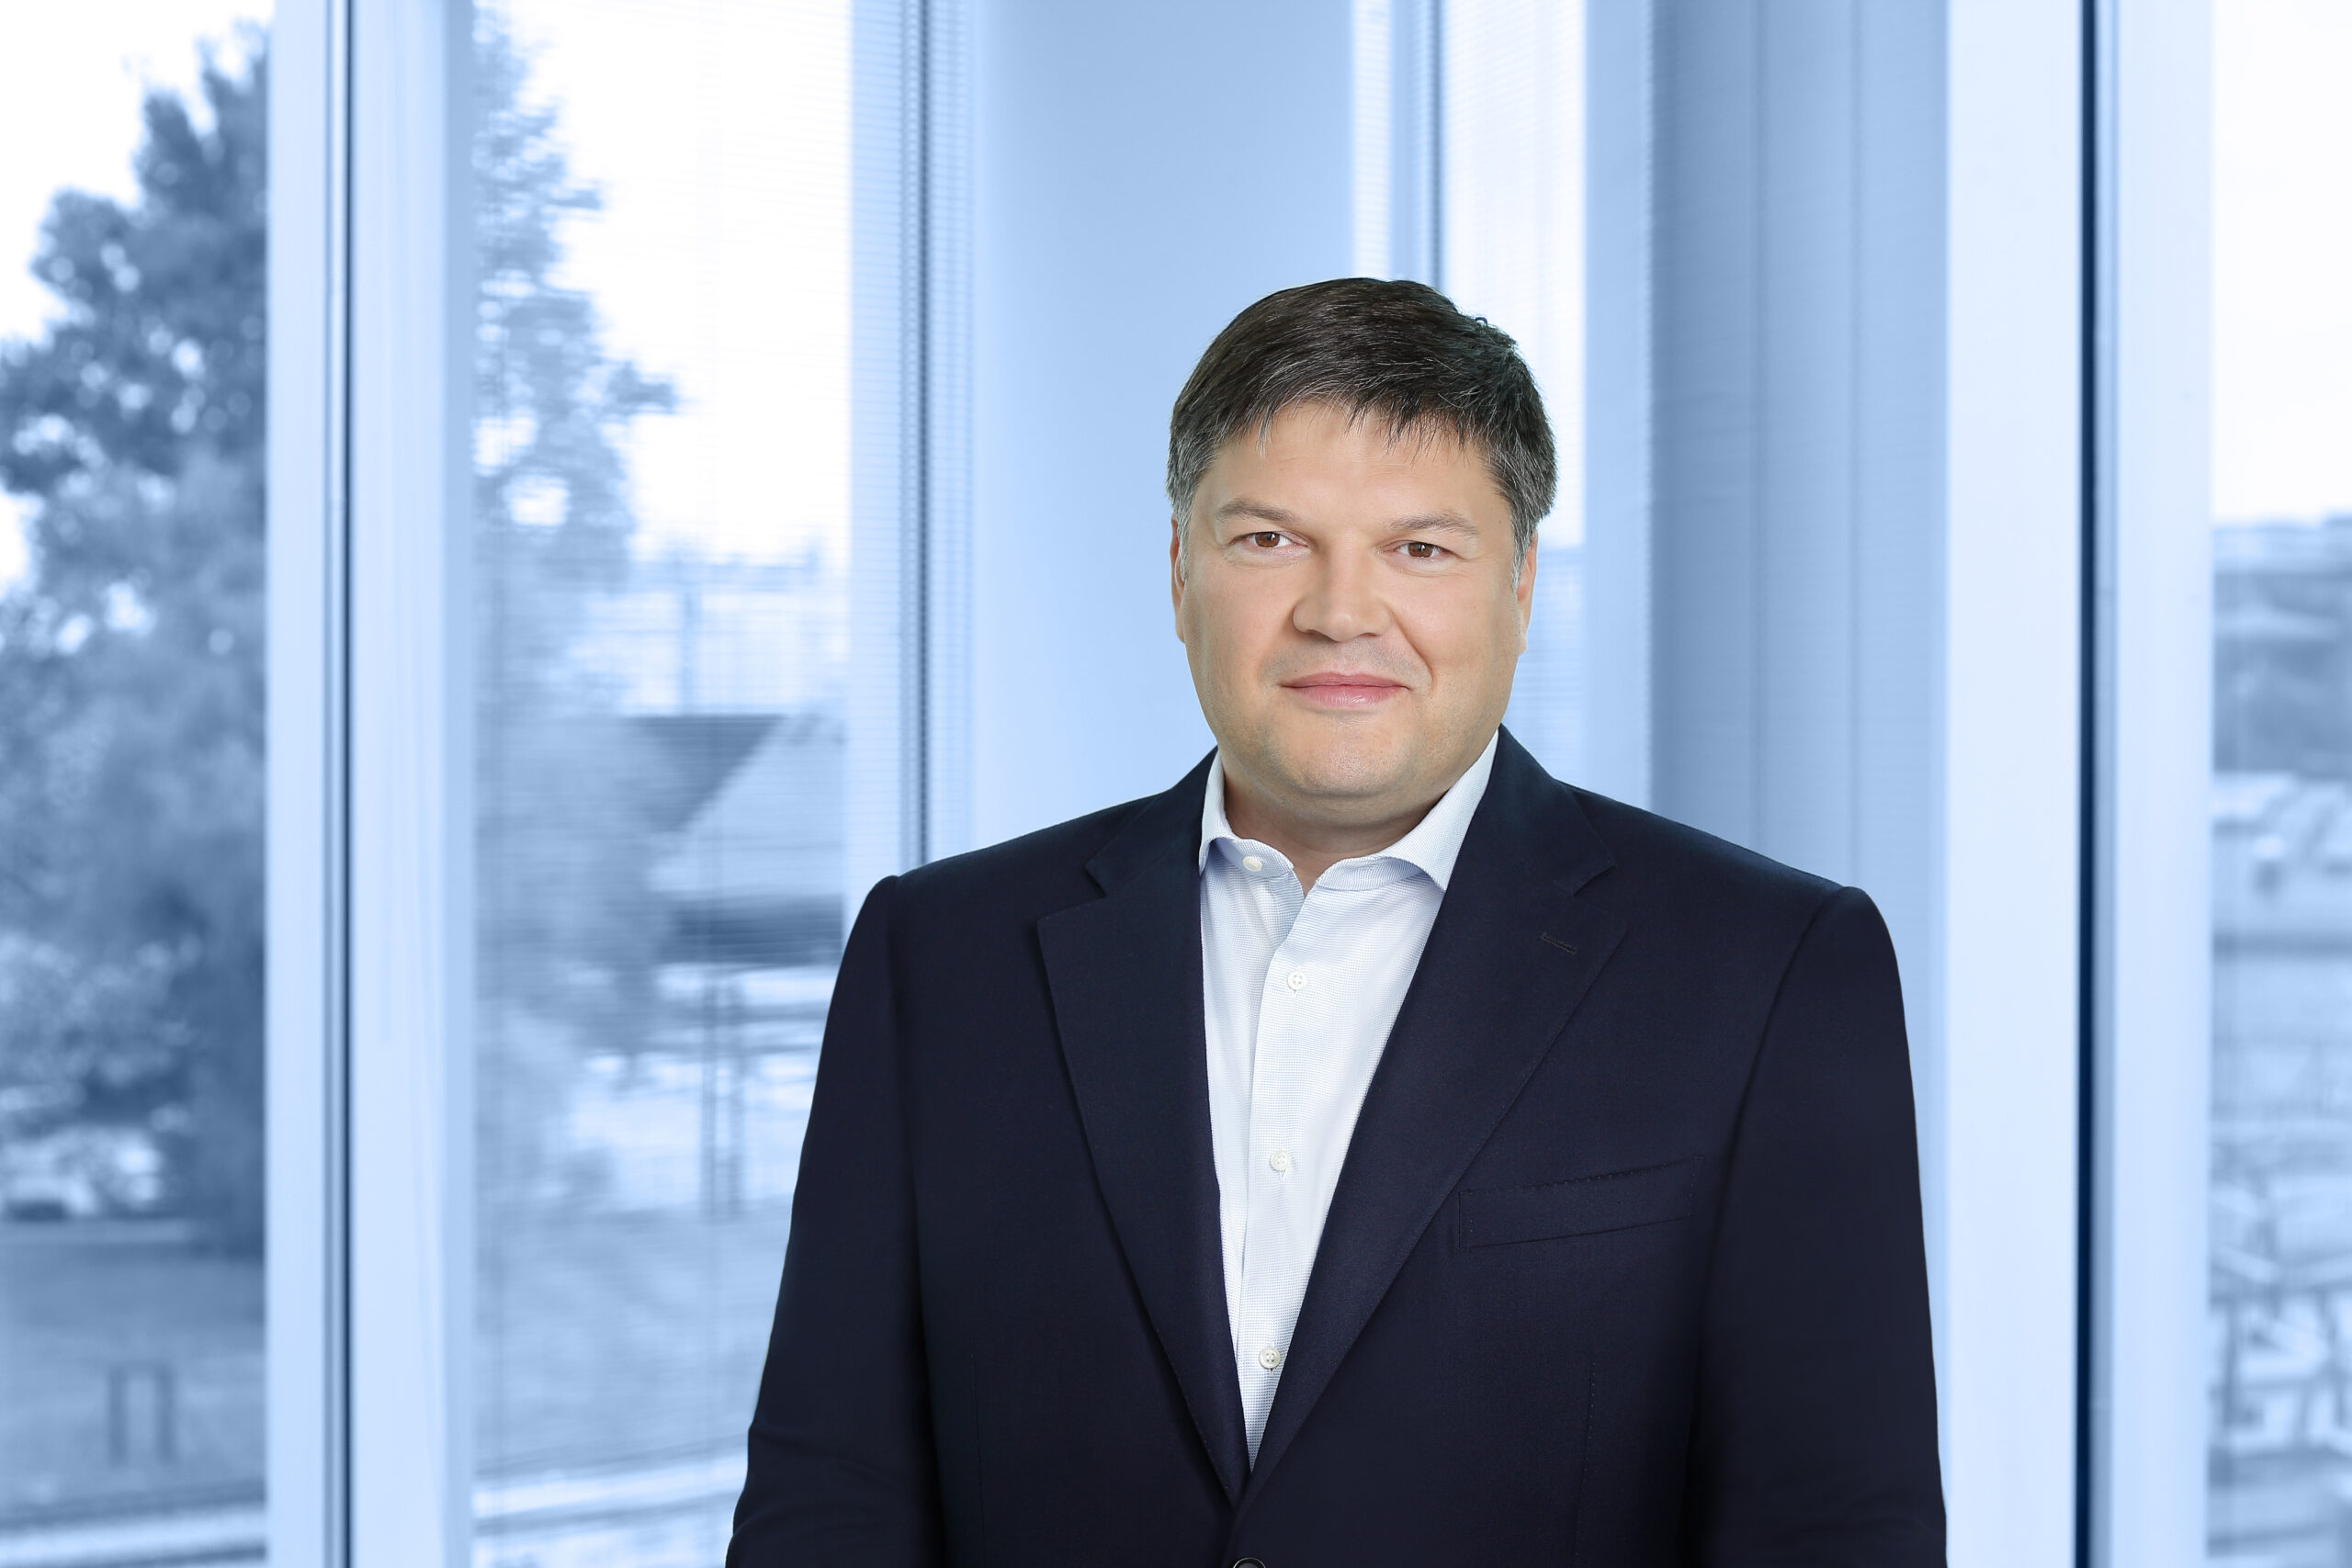 Raul Toomsalu: The sale of Operail’s assets is professionally organised 